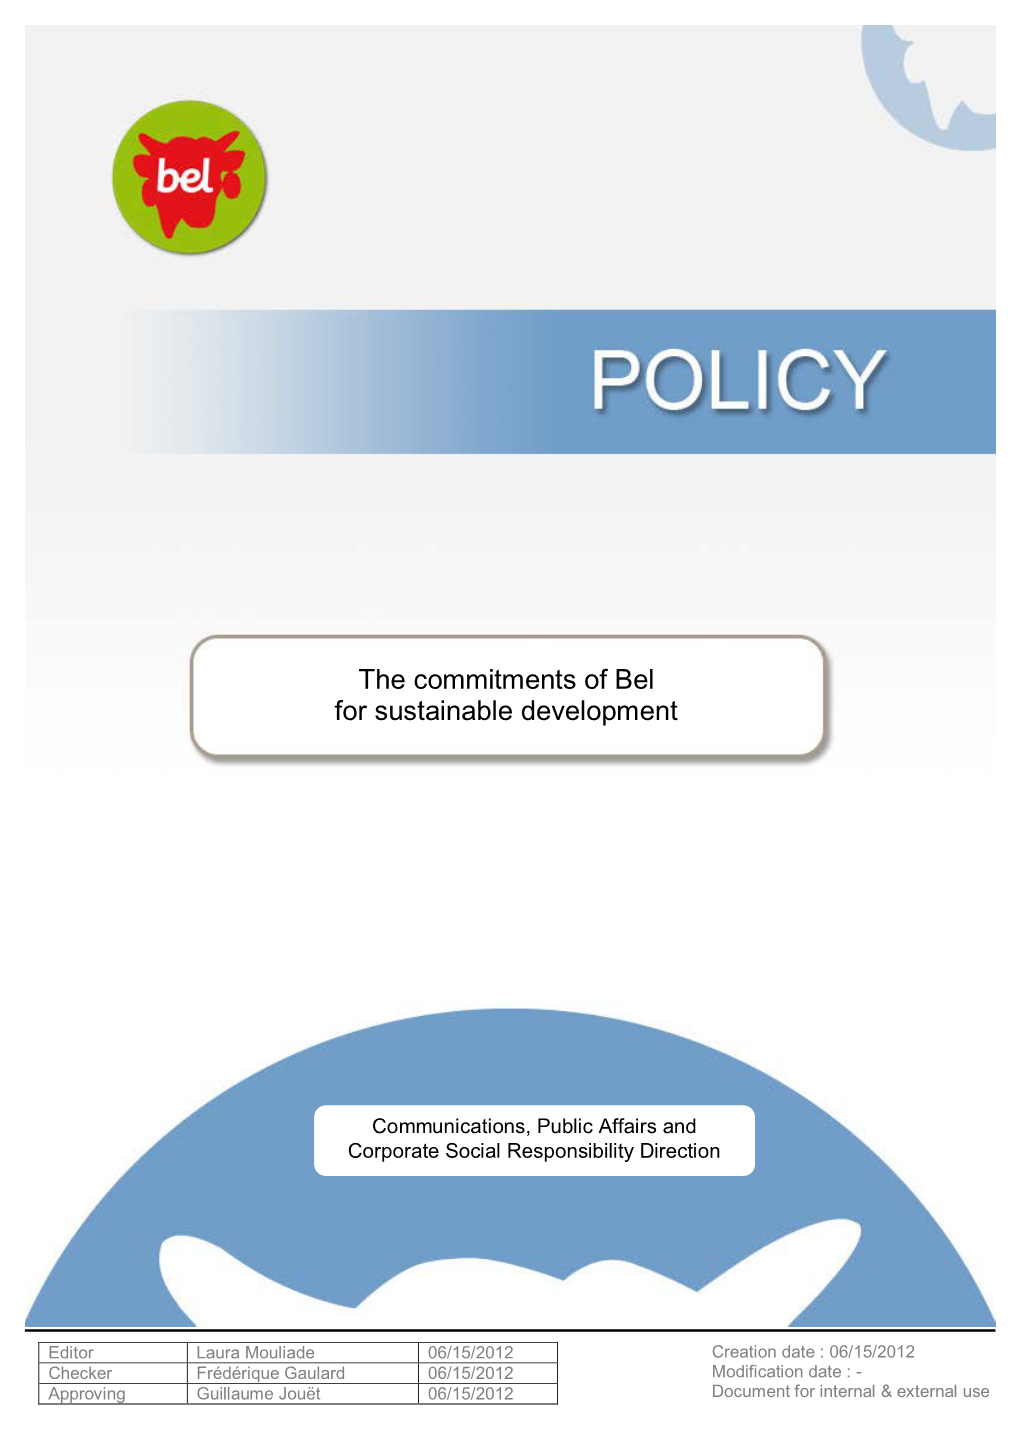 The Commitments of Bel for Sustainable Development